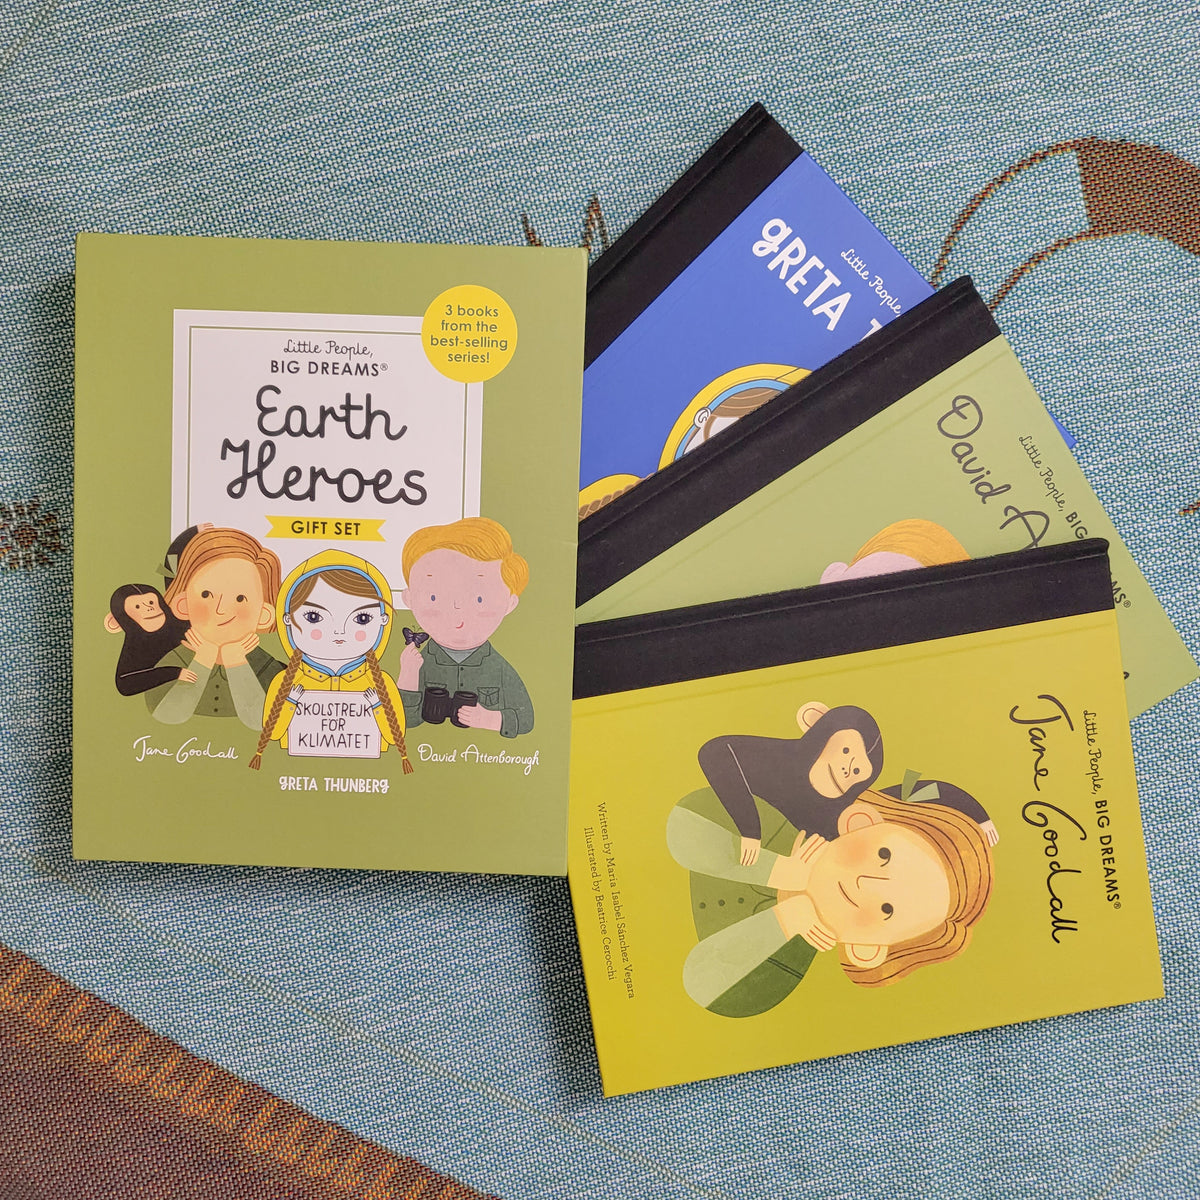 image of children's book called Little People Big Dreams, Earth Heroes. There are 3 books, each called Greta Thunberg, David Attenborough and Jane Goodall.